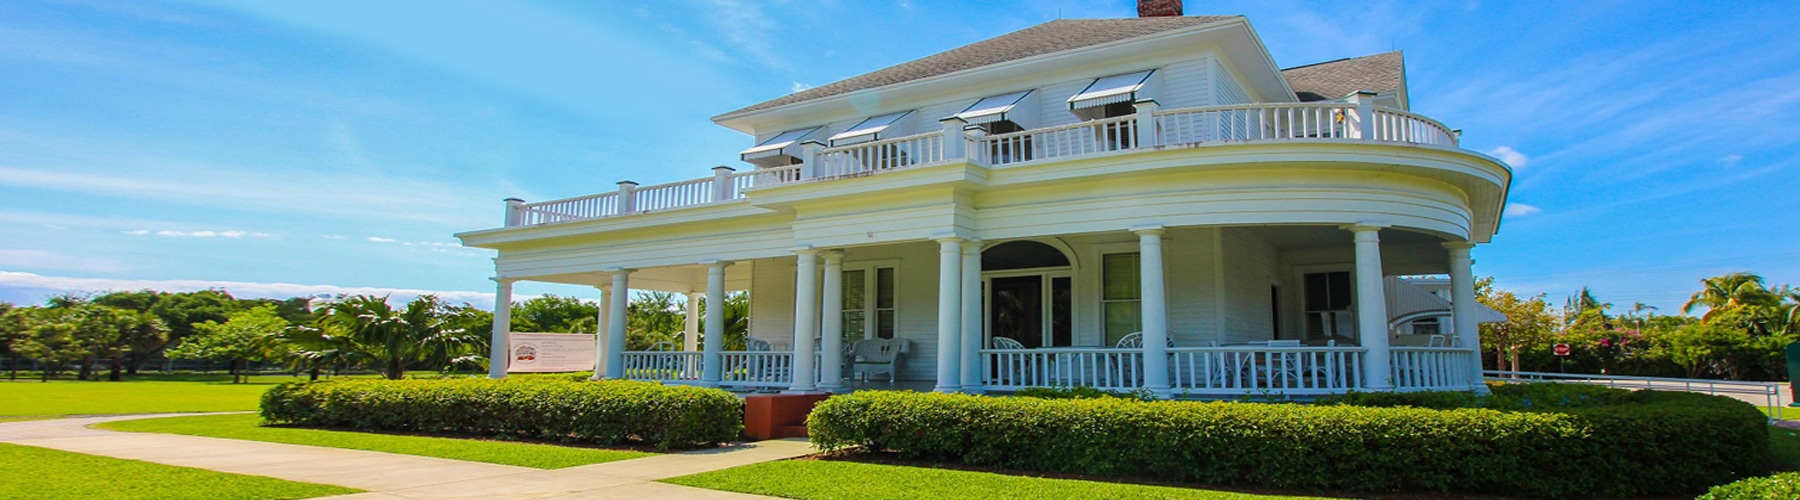 Image Of Sample-McDougald House Museum